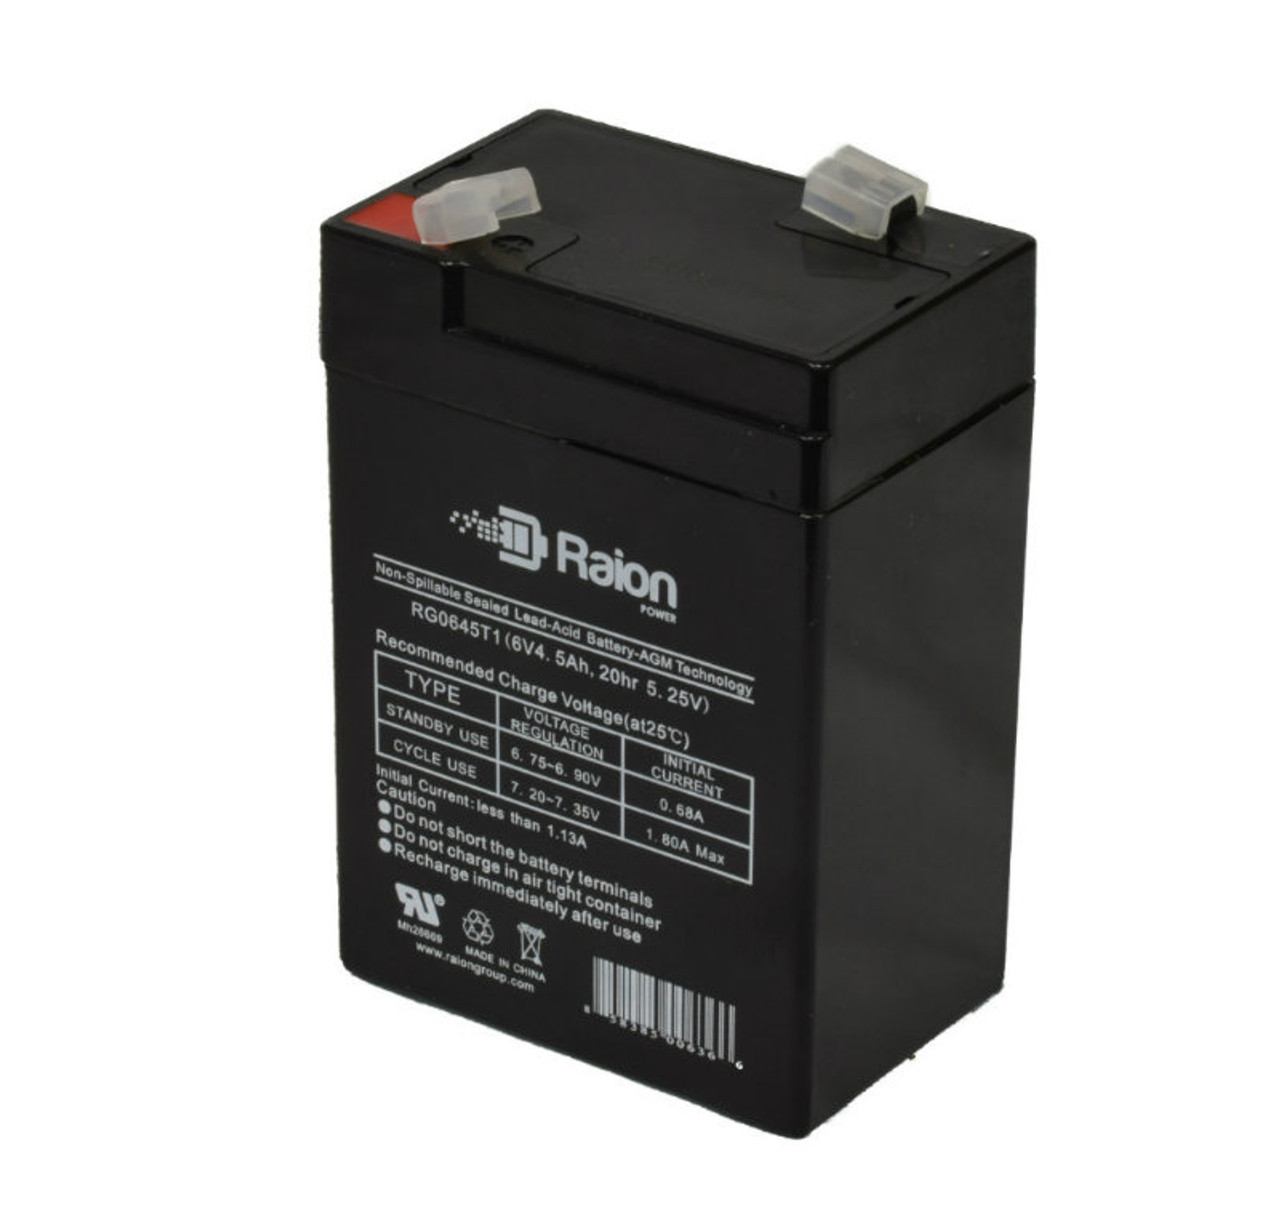 Raion Power RG0645T1 6V 4.5Ah Replacement Battery Cartridge for Blossom BT5-6A